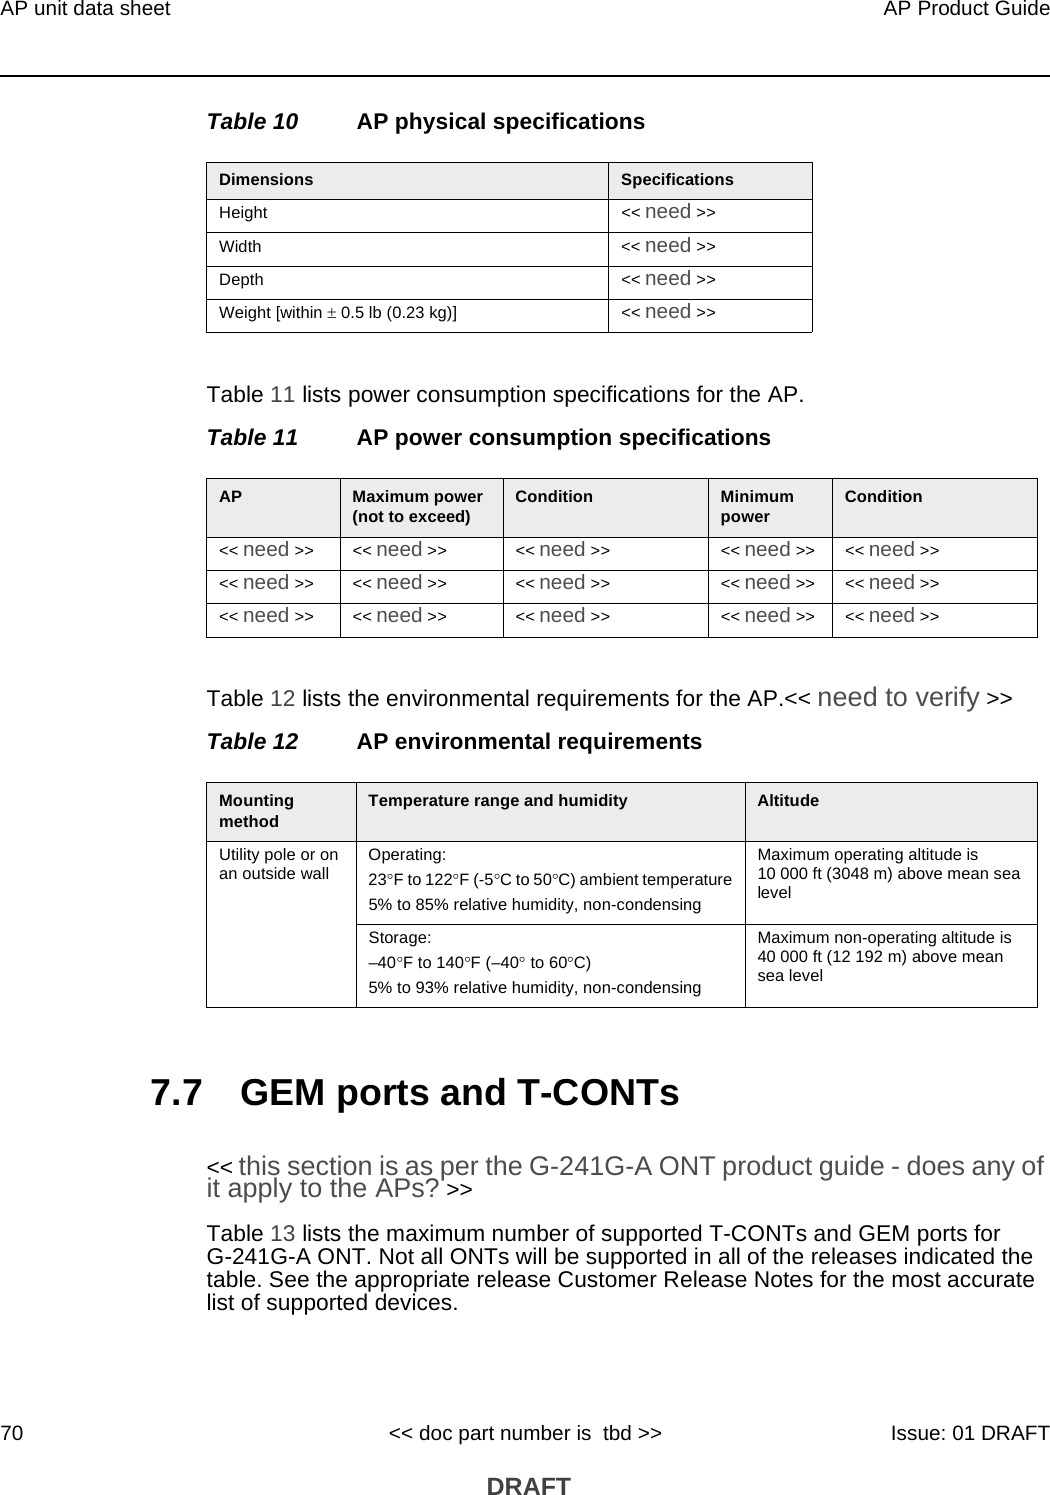 AP unit data sheet70AP Product Guide&lt;&lt; doc part number is  tbd &gt;&gt; Issue: 01 DRAFT DRAFTTable 10 AP physical specificationsTable 11 lists power consumption specifications for the AP. Table 11 AP power consumption specificationsTable 12 lists the environmental requirements for the AP.&lt;&lt; need to verify &gt;&gt;Table 12 AP environmental requirements7.7 GEM ports and T-CONTs&lt;&lt; this section is as per the G-241G-A ONT product guide - does any of it apply to the APs? &gt;&gt;Table 13 lists the maximum number of supported T-CONTs and GEM ports for G-241G-A ONT. Not all ONTs will be supported in all of the releases indicated the table. See the appropriate release Customer Release Notes for the most accurate list of supported devices.Dimensions SpecificationsHeight &lt;&lt; need &gt;&gt;Width &lt;&lt; need &gt;&gt;Depth &lt;&lt; need &gt;&gt;Weight [within  0.5 lb (0.23 kg)] &lt;&lt; need &gt;&gt;AP Maximum power (not to exceed) Condition Minimum power Condition&lt;&lt; need &gt;&gt; &lt;&lt; need &gt;&gt; &lt;&lt; need &gt;&gt; &lt;&lt; need &gt;&gt; &lt;&lt; need &gt;&gt;&lt;&lt; need &gt;&gt; &lt;&lt; need &gt;&gt; &lt;&lt; need &gt;&gt; &lt;&lt; need &gt;&gt; &lt;&lt; need &gt;&gt;&lt;&lt; need &gt;&gt; &lt;&lt; need &gt;&gt; &lt;&lt; need &gt;&gt; &lt;&lt; need &gt;&gt; &lt;&lt; need &gt;&gt;Mounting method Temperature range and humidity AltitudeUtility pole or on an outside wall Operating:23F to 122F (-5C to 50C) ambient temperature5% to 85% relative humidity, non-condensingMaximum operating altitude is 10 000 ft (3048 m) above mean sea levelStorage:–40F to 140F (–40 to 60C) 5% to 93% relative humidity, non-condensingMaximum non-operating altitude is 40 000 ft (12 192 m) above mean sea level 